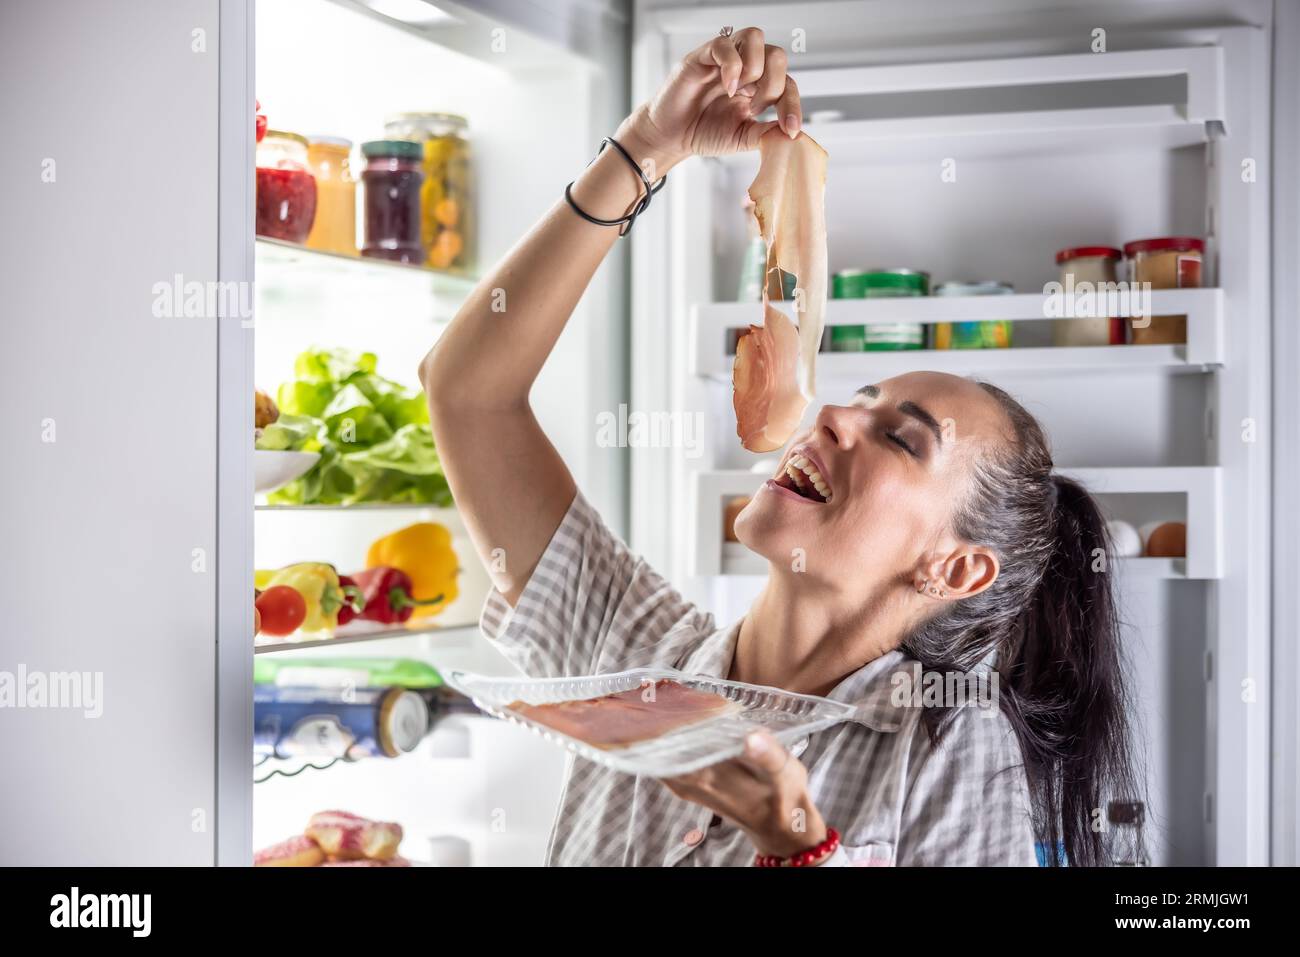 Very hungry woman in pajamas enjoying prosciutto at night by the fridge. Stock Photo